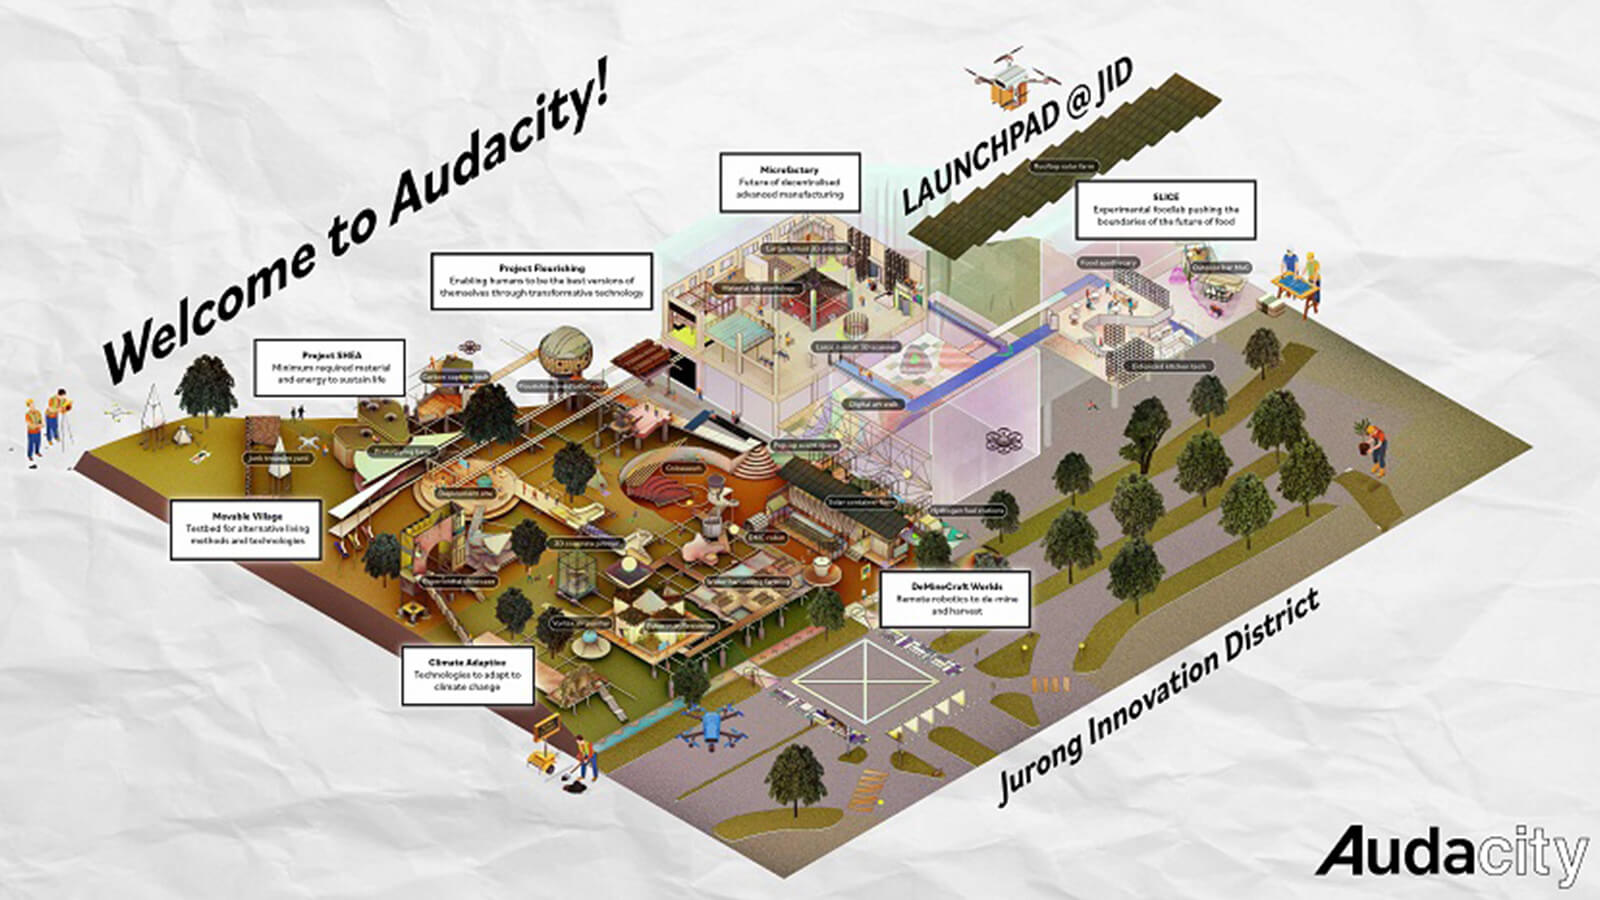 An artist impression of AUDACITY Innovators’ Playground showcases its whole-systems approach